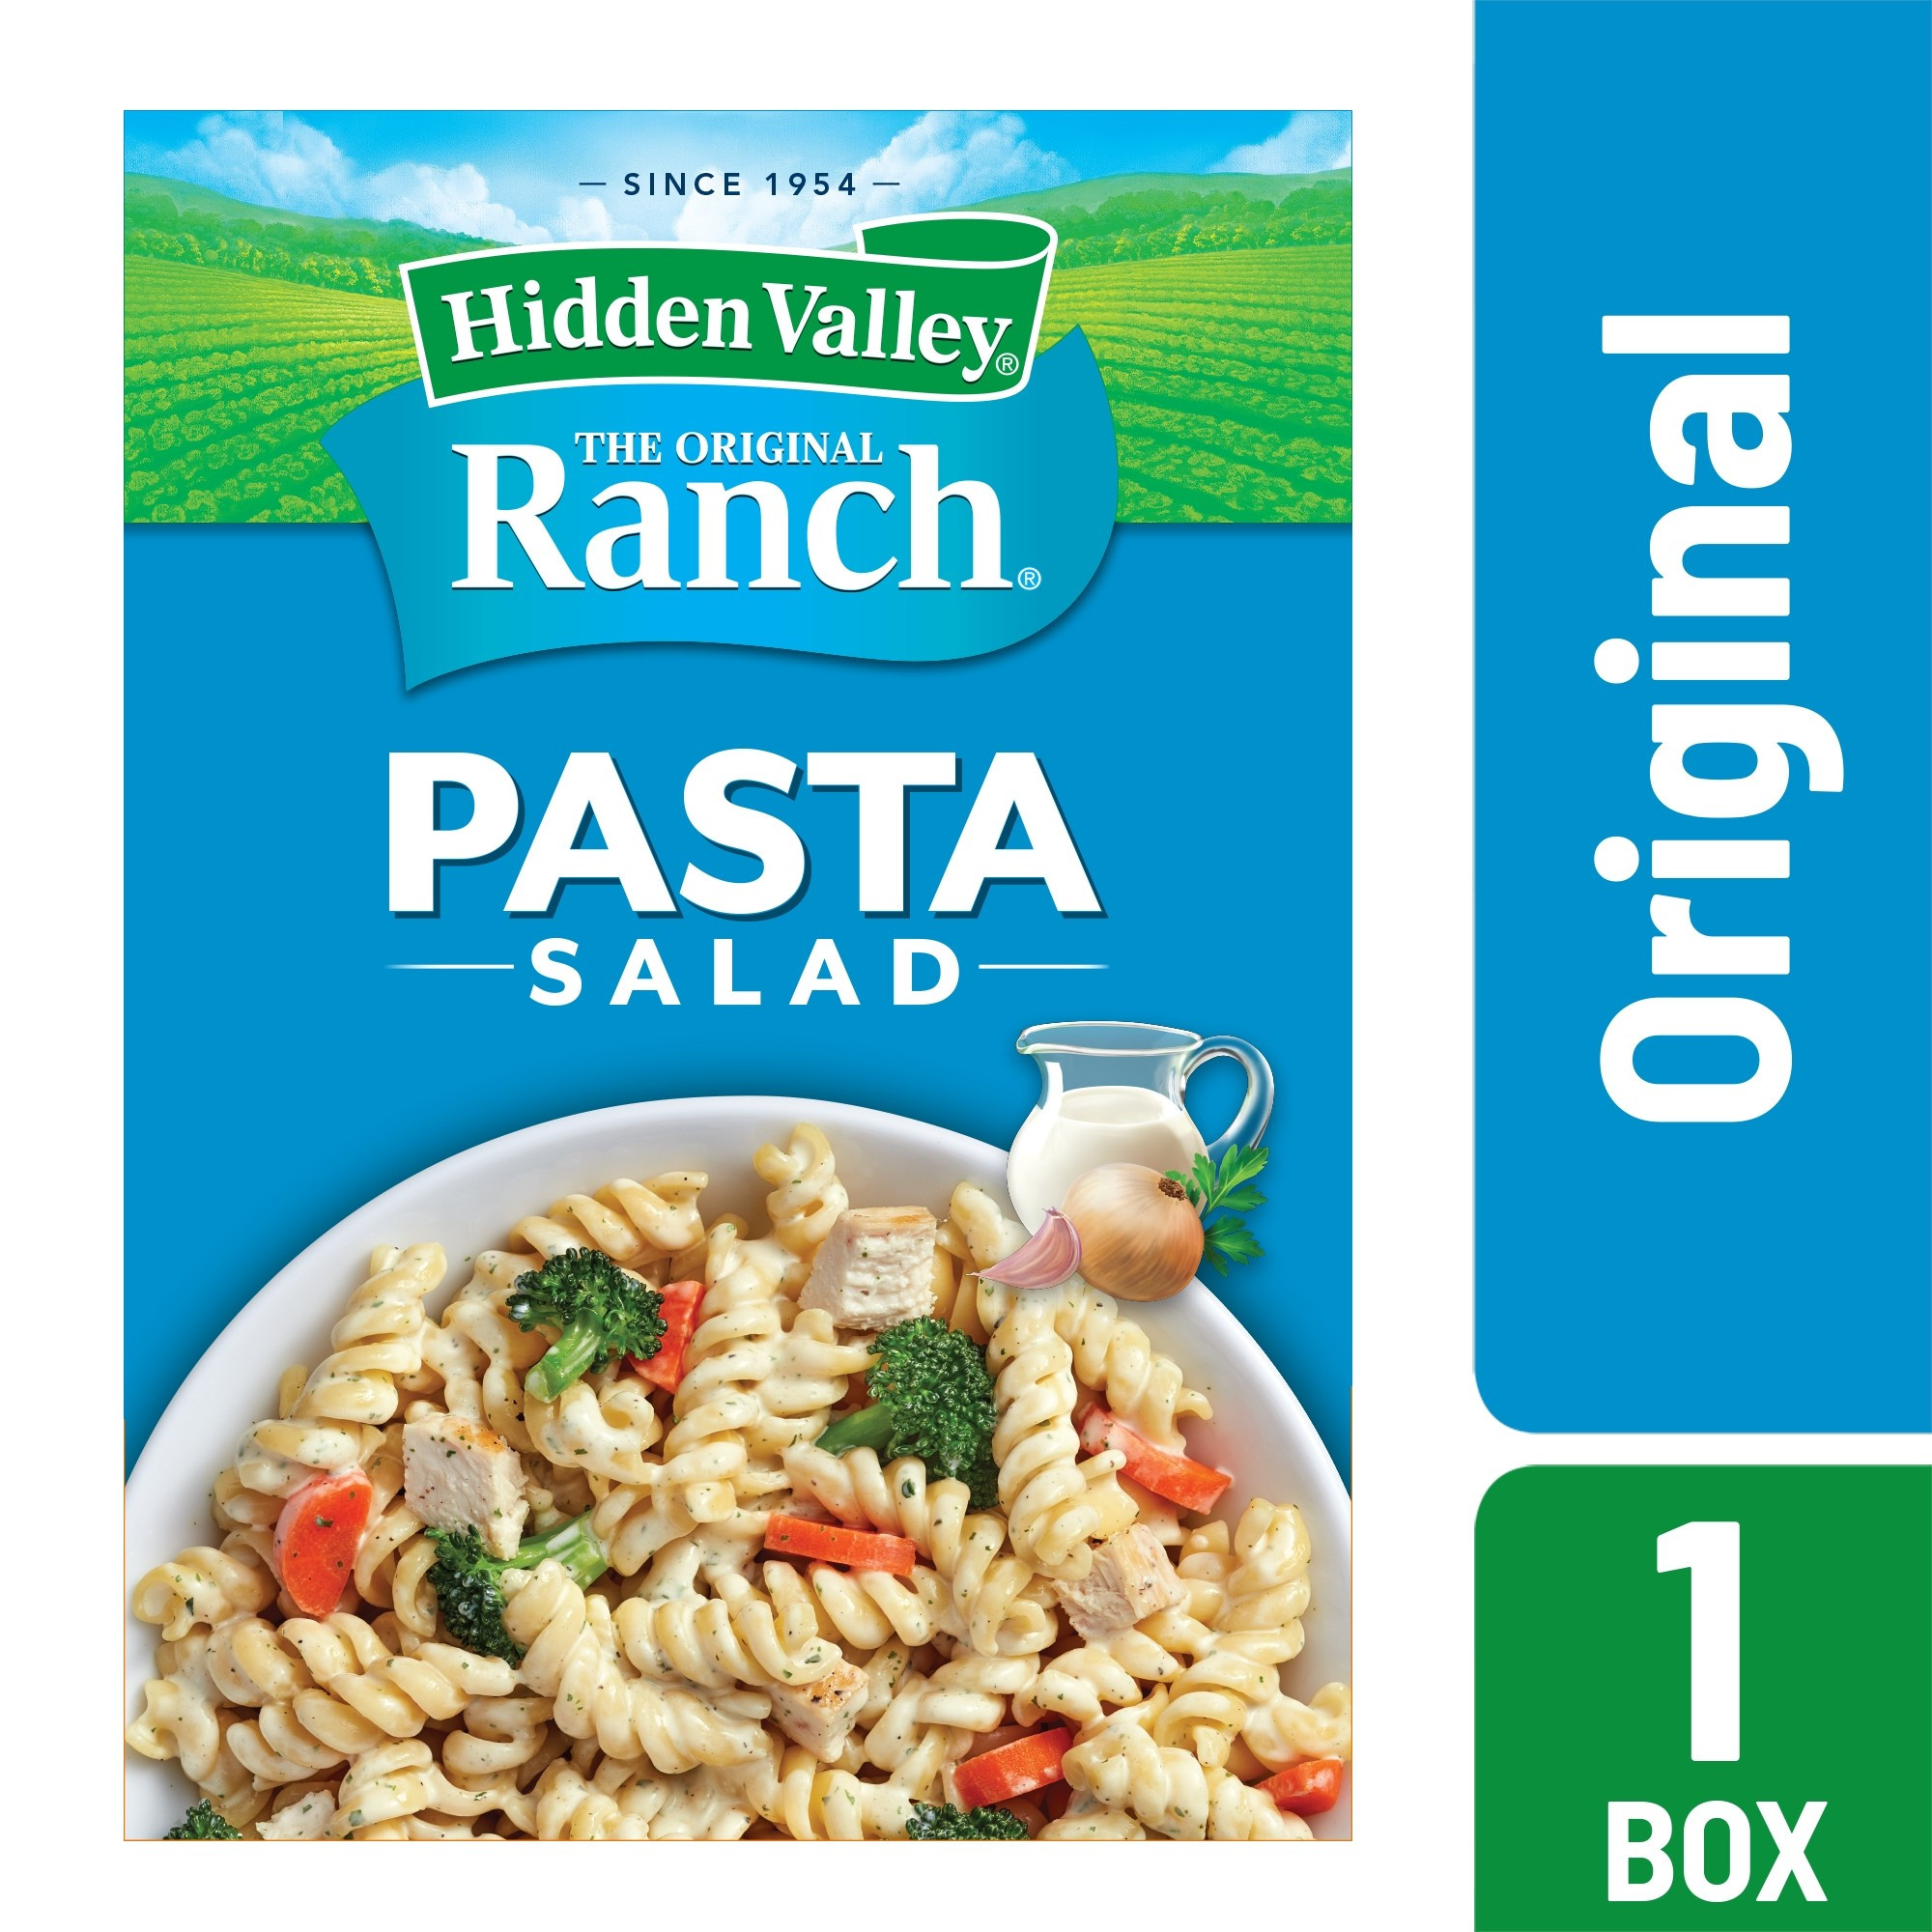 The top 15 Ideas About Hidden Valley Ranch Pasta Salad